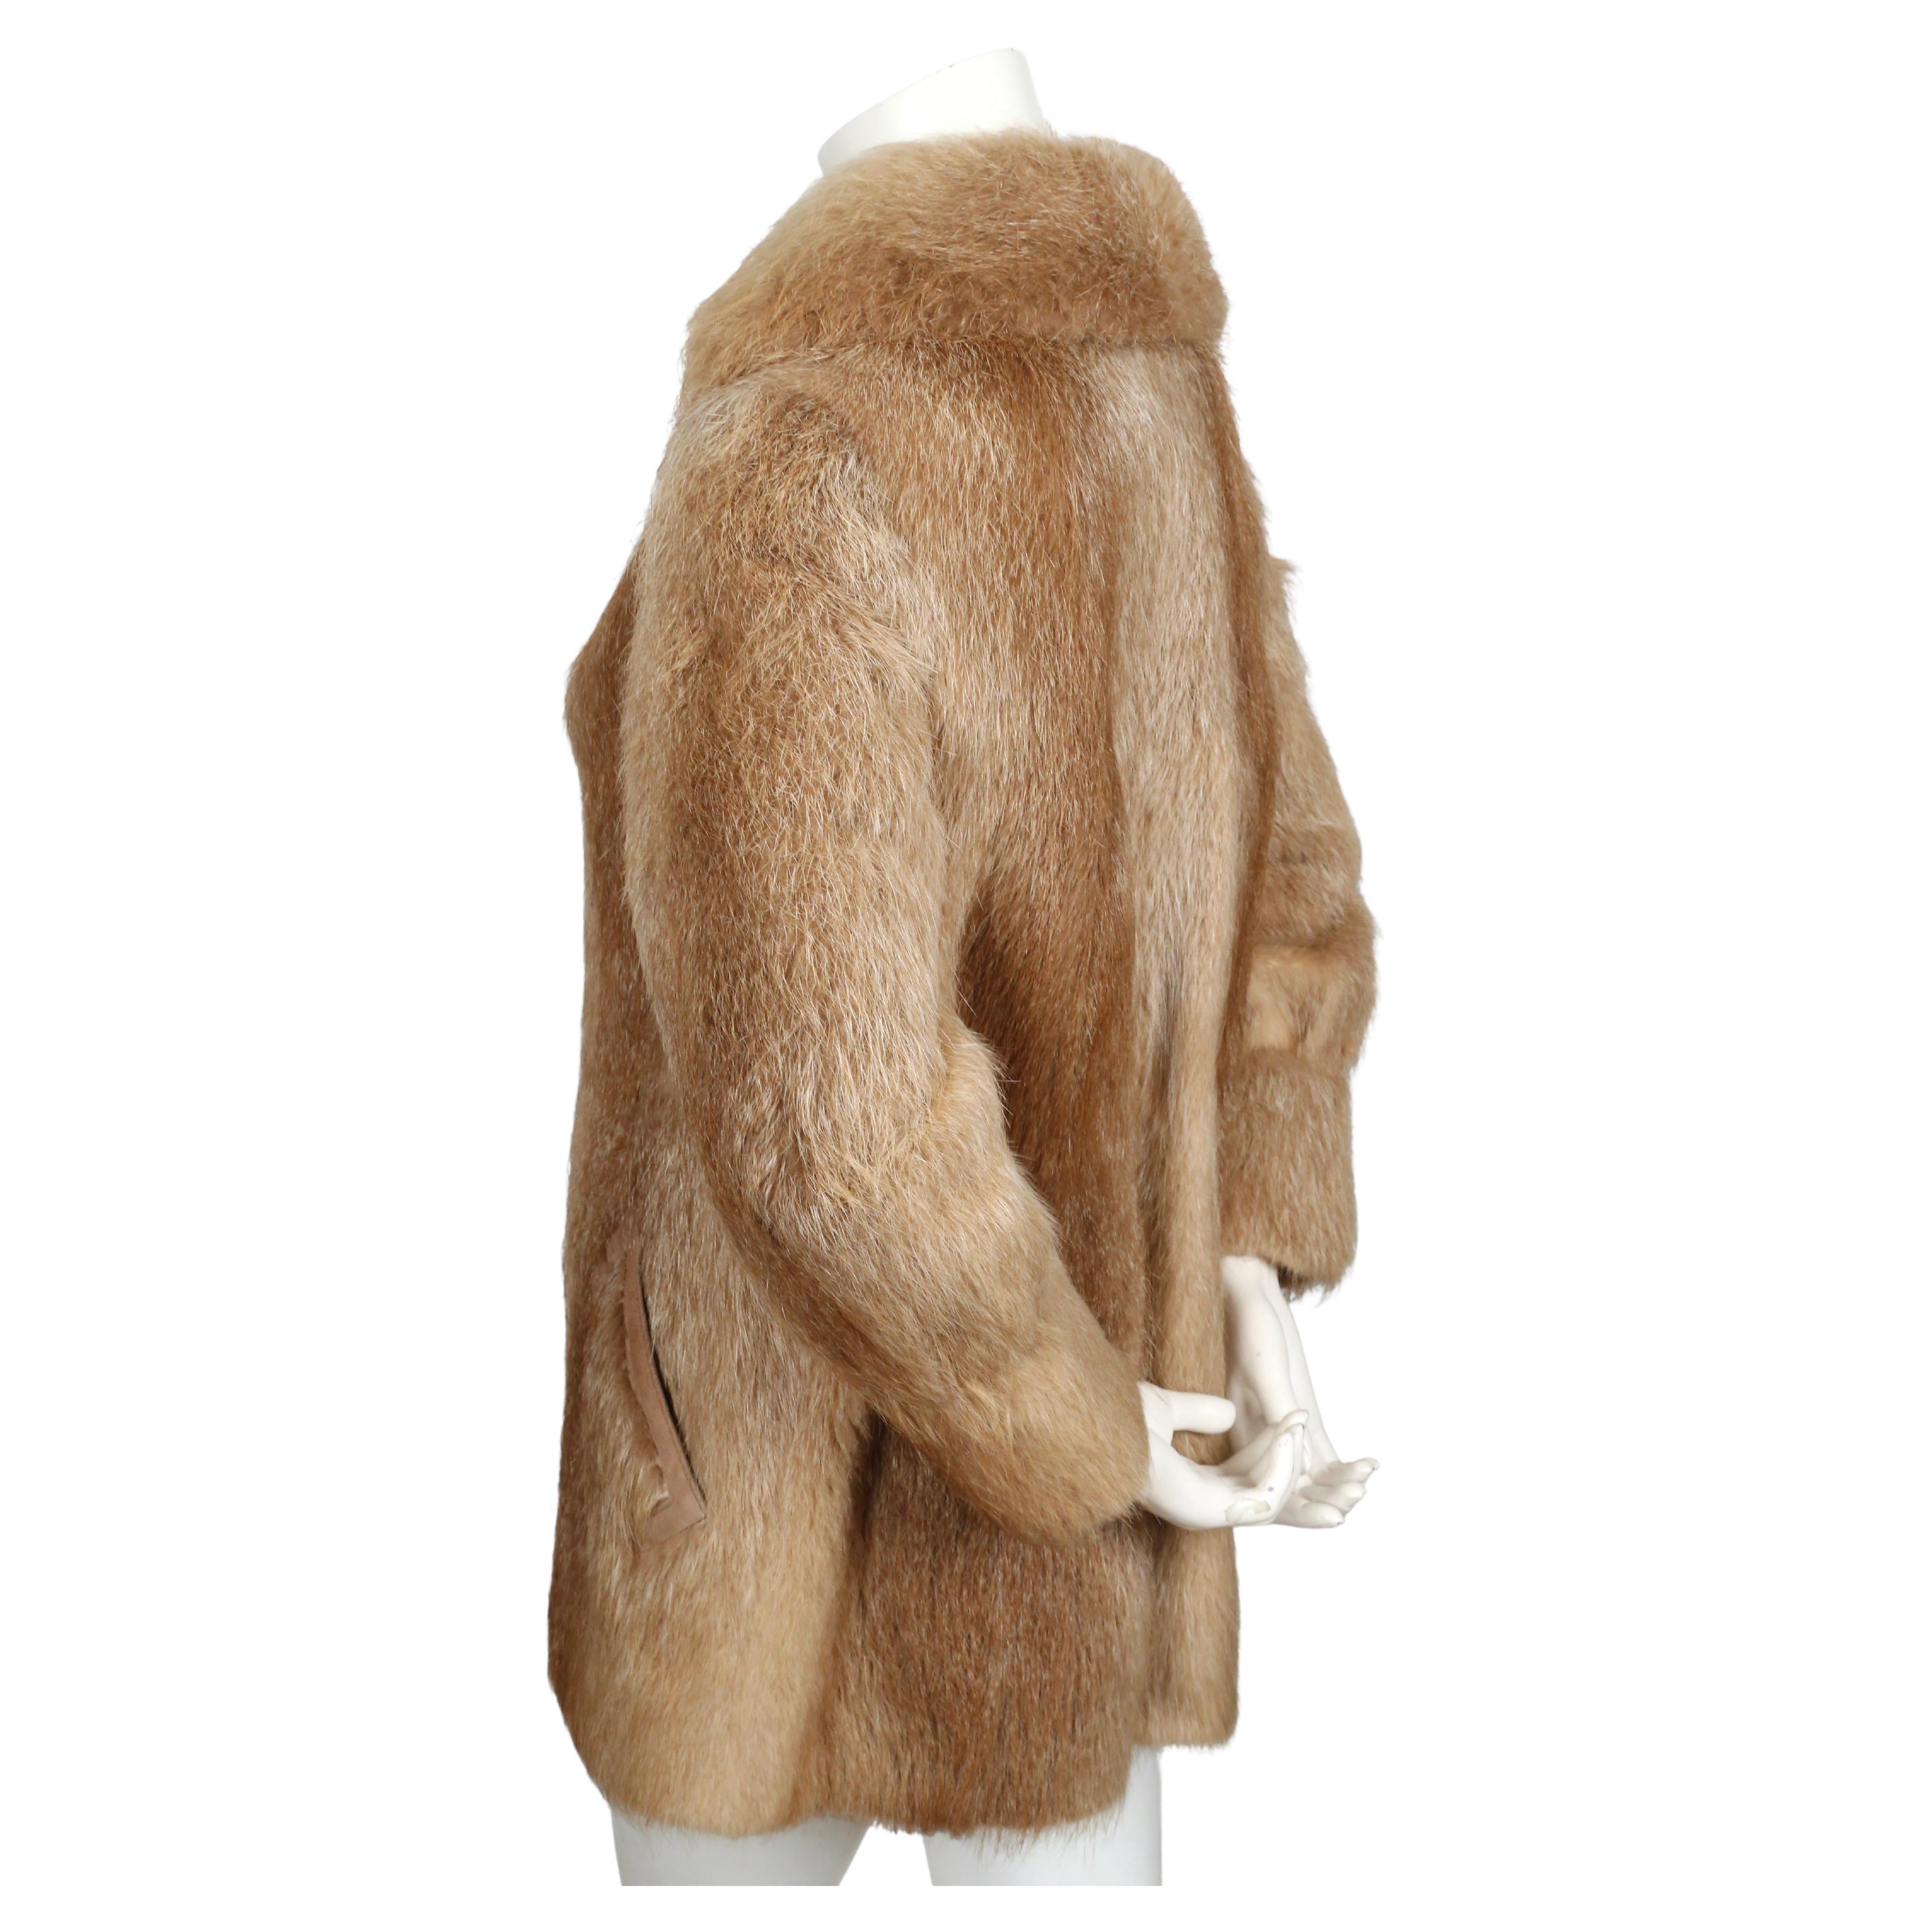 Nutria fur coat with large collar and suede trim from Halston dating to the late 1970's. Fits a size 4 or 6. Approximate measurements: 15